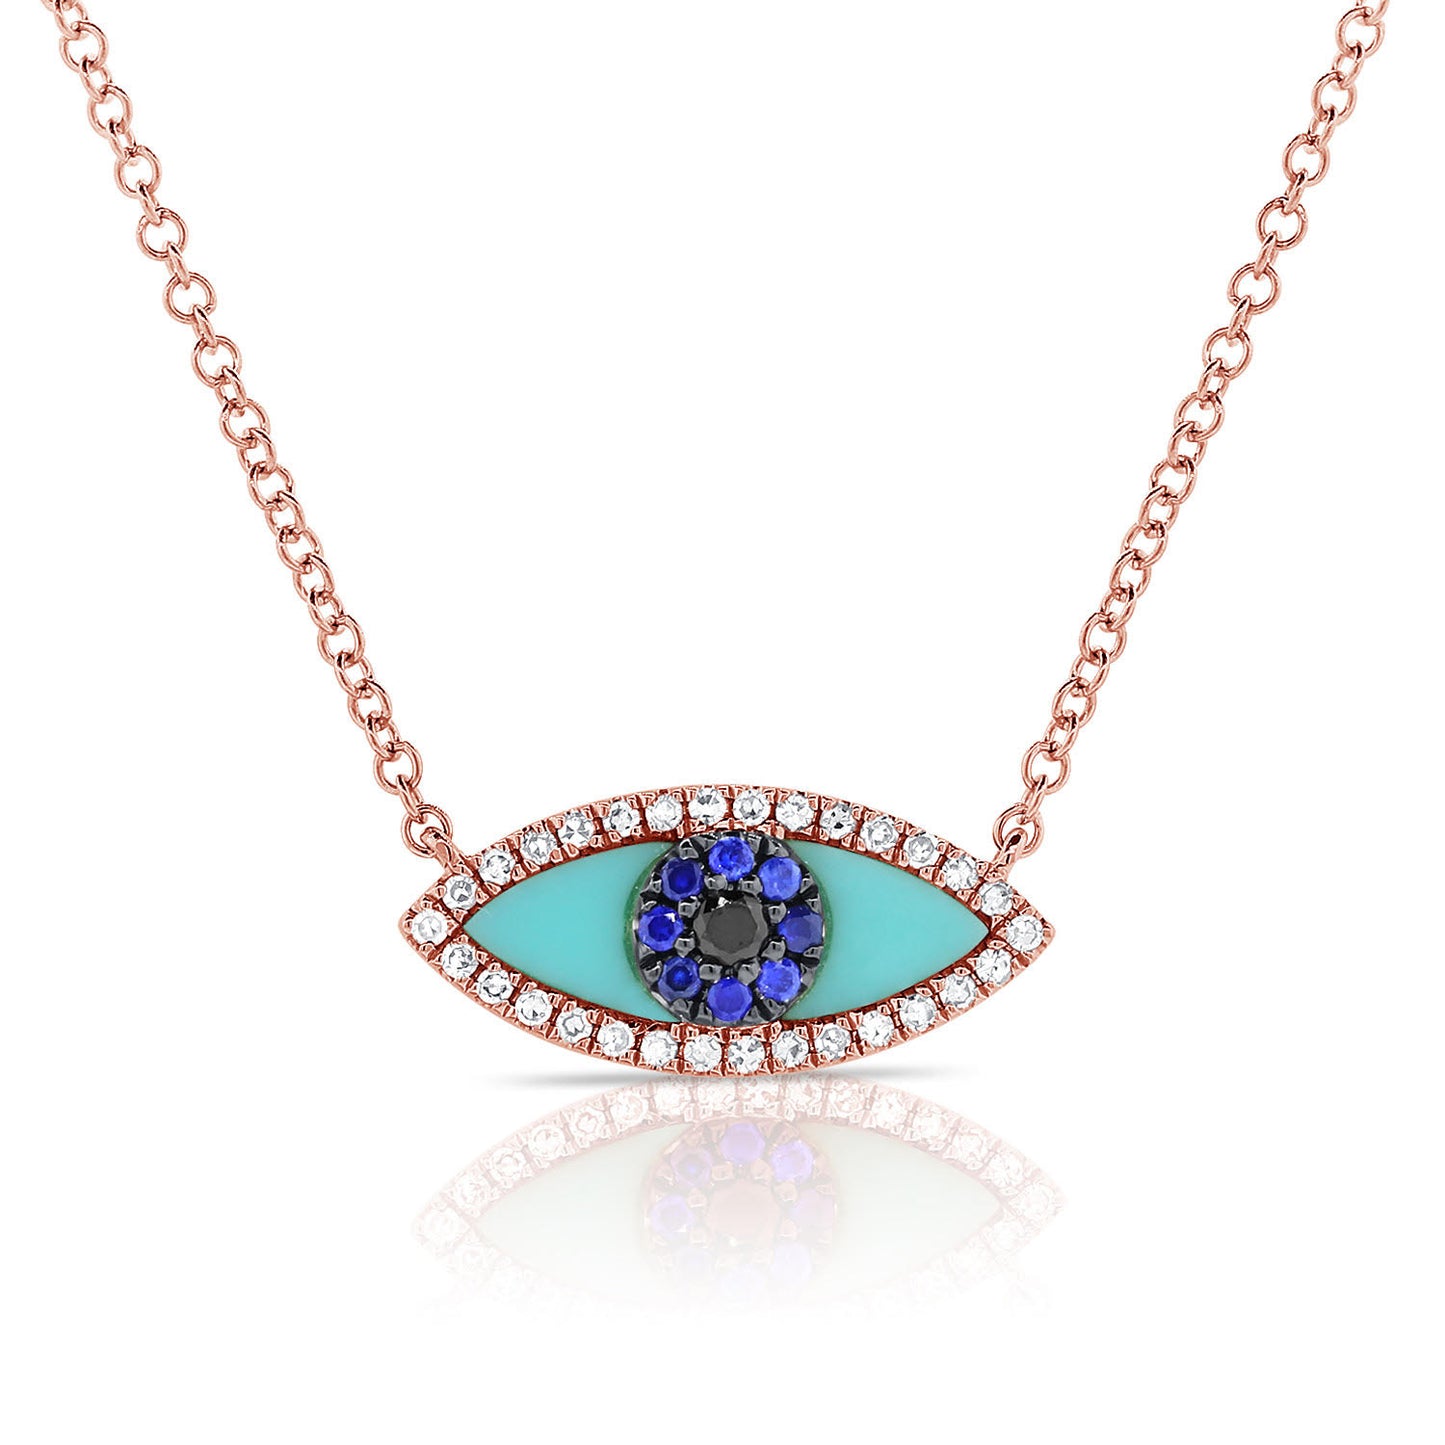 Turquoise, Sapphire & Diamond Eye on Chain Necklace